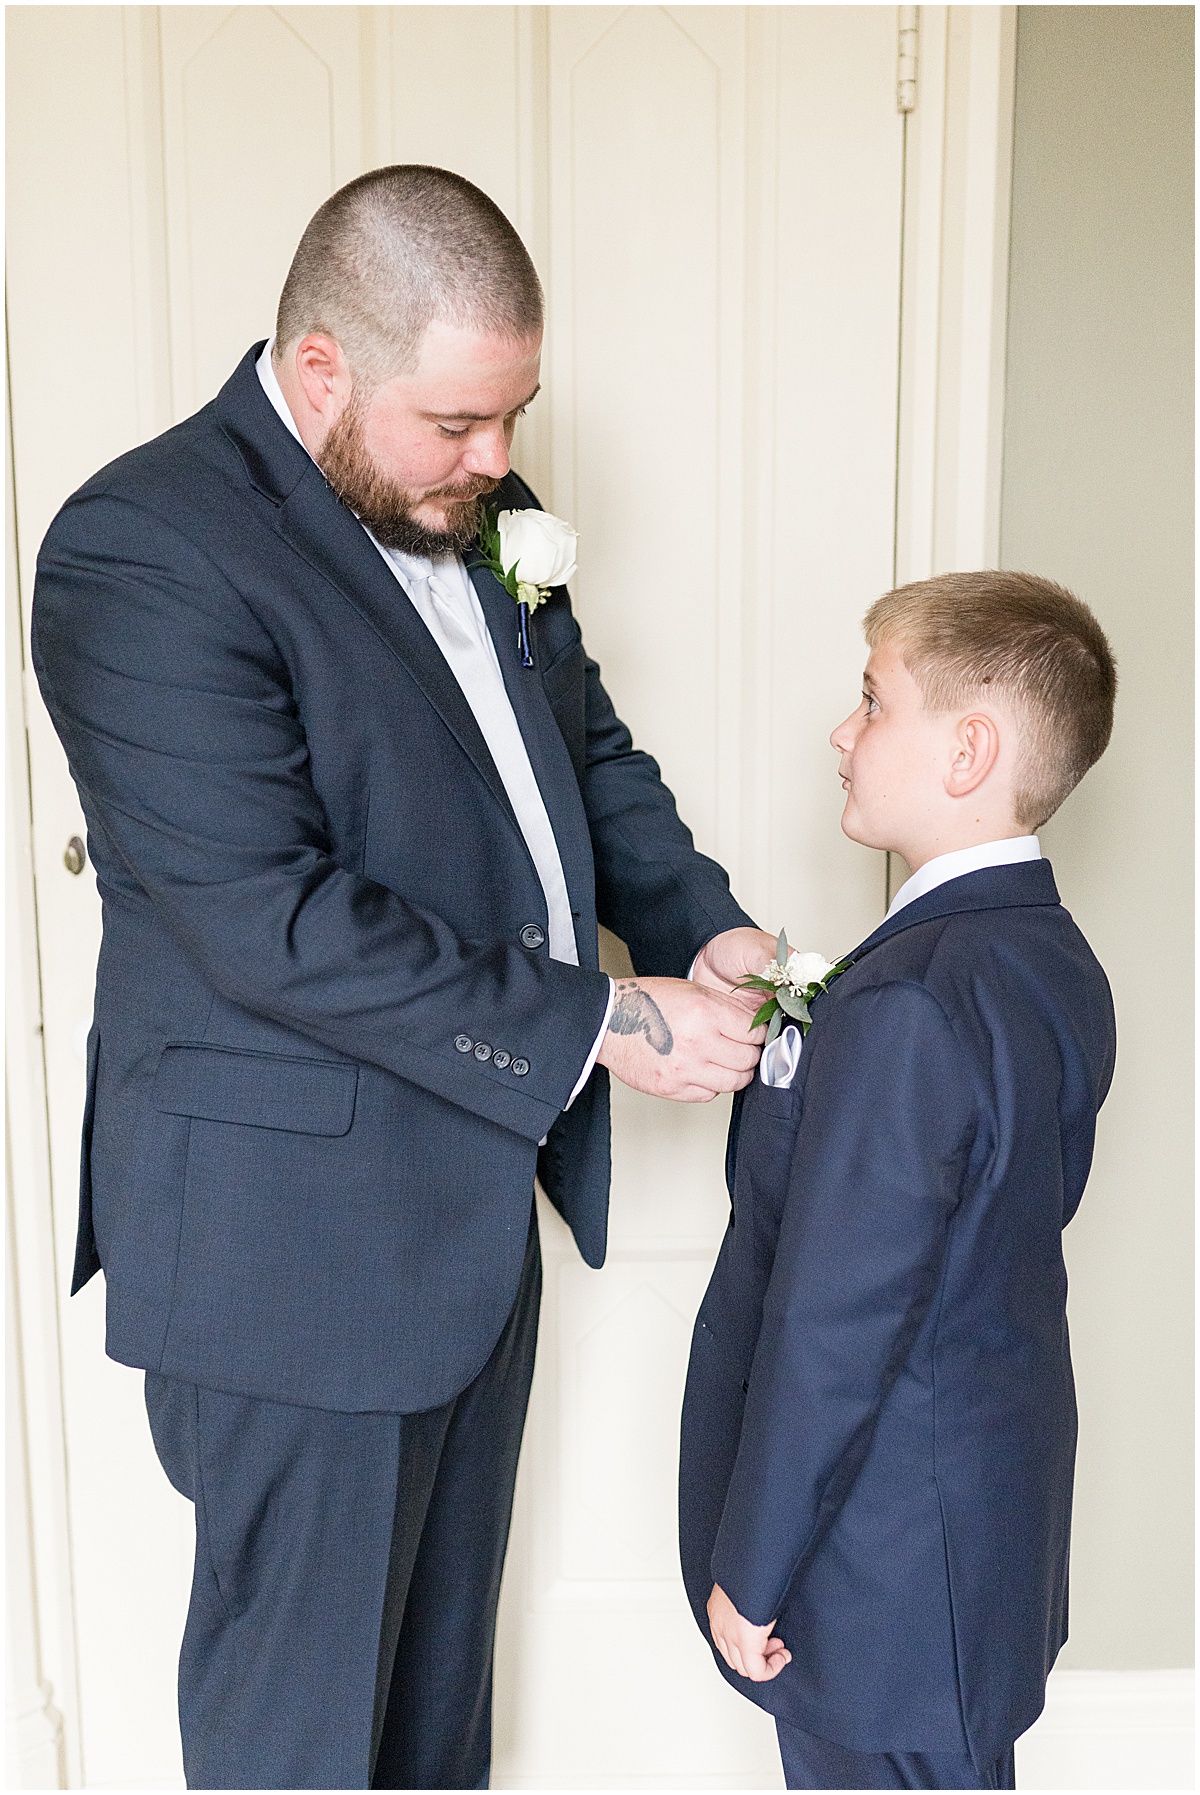 Groom helping son get ready for wedding at Fowler House Mansion